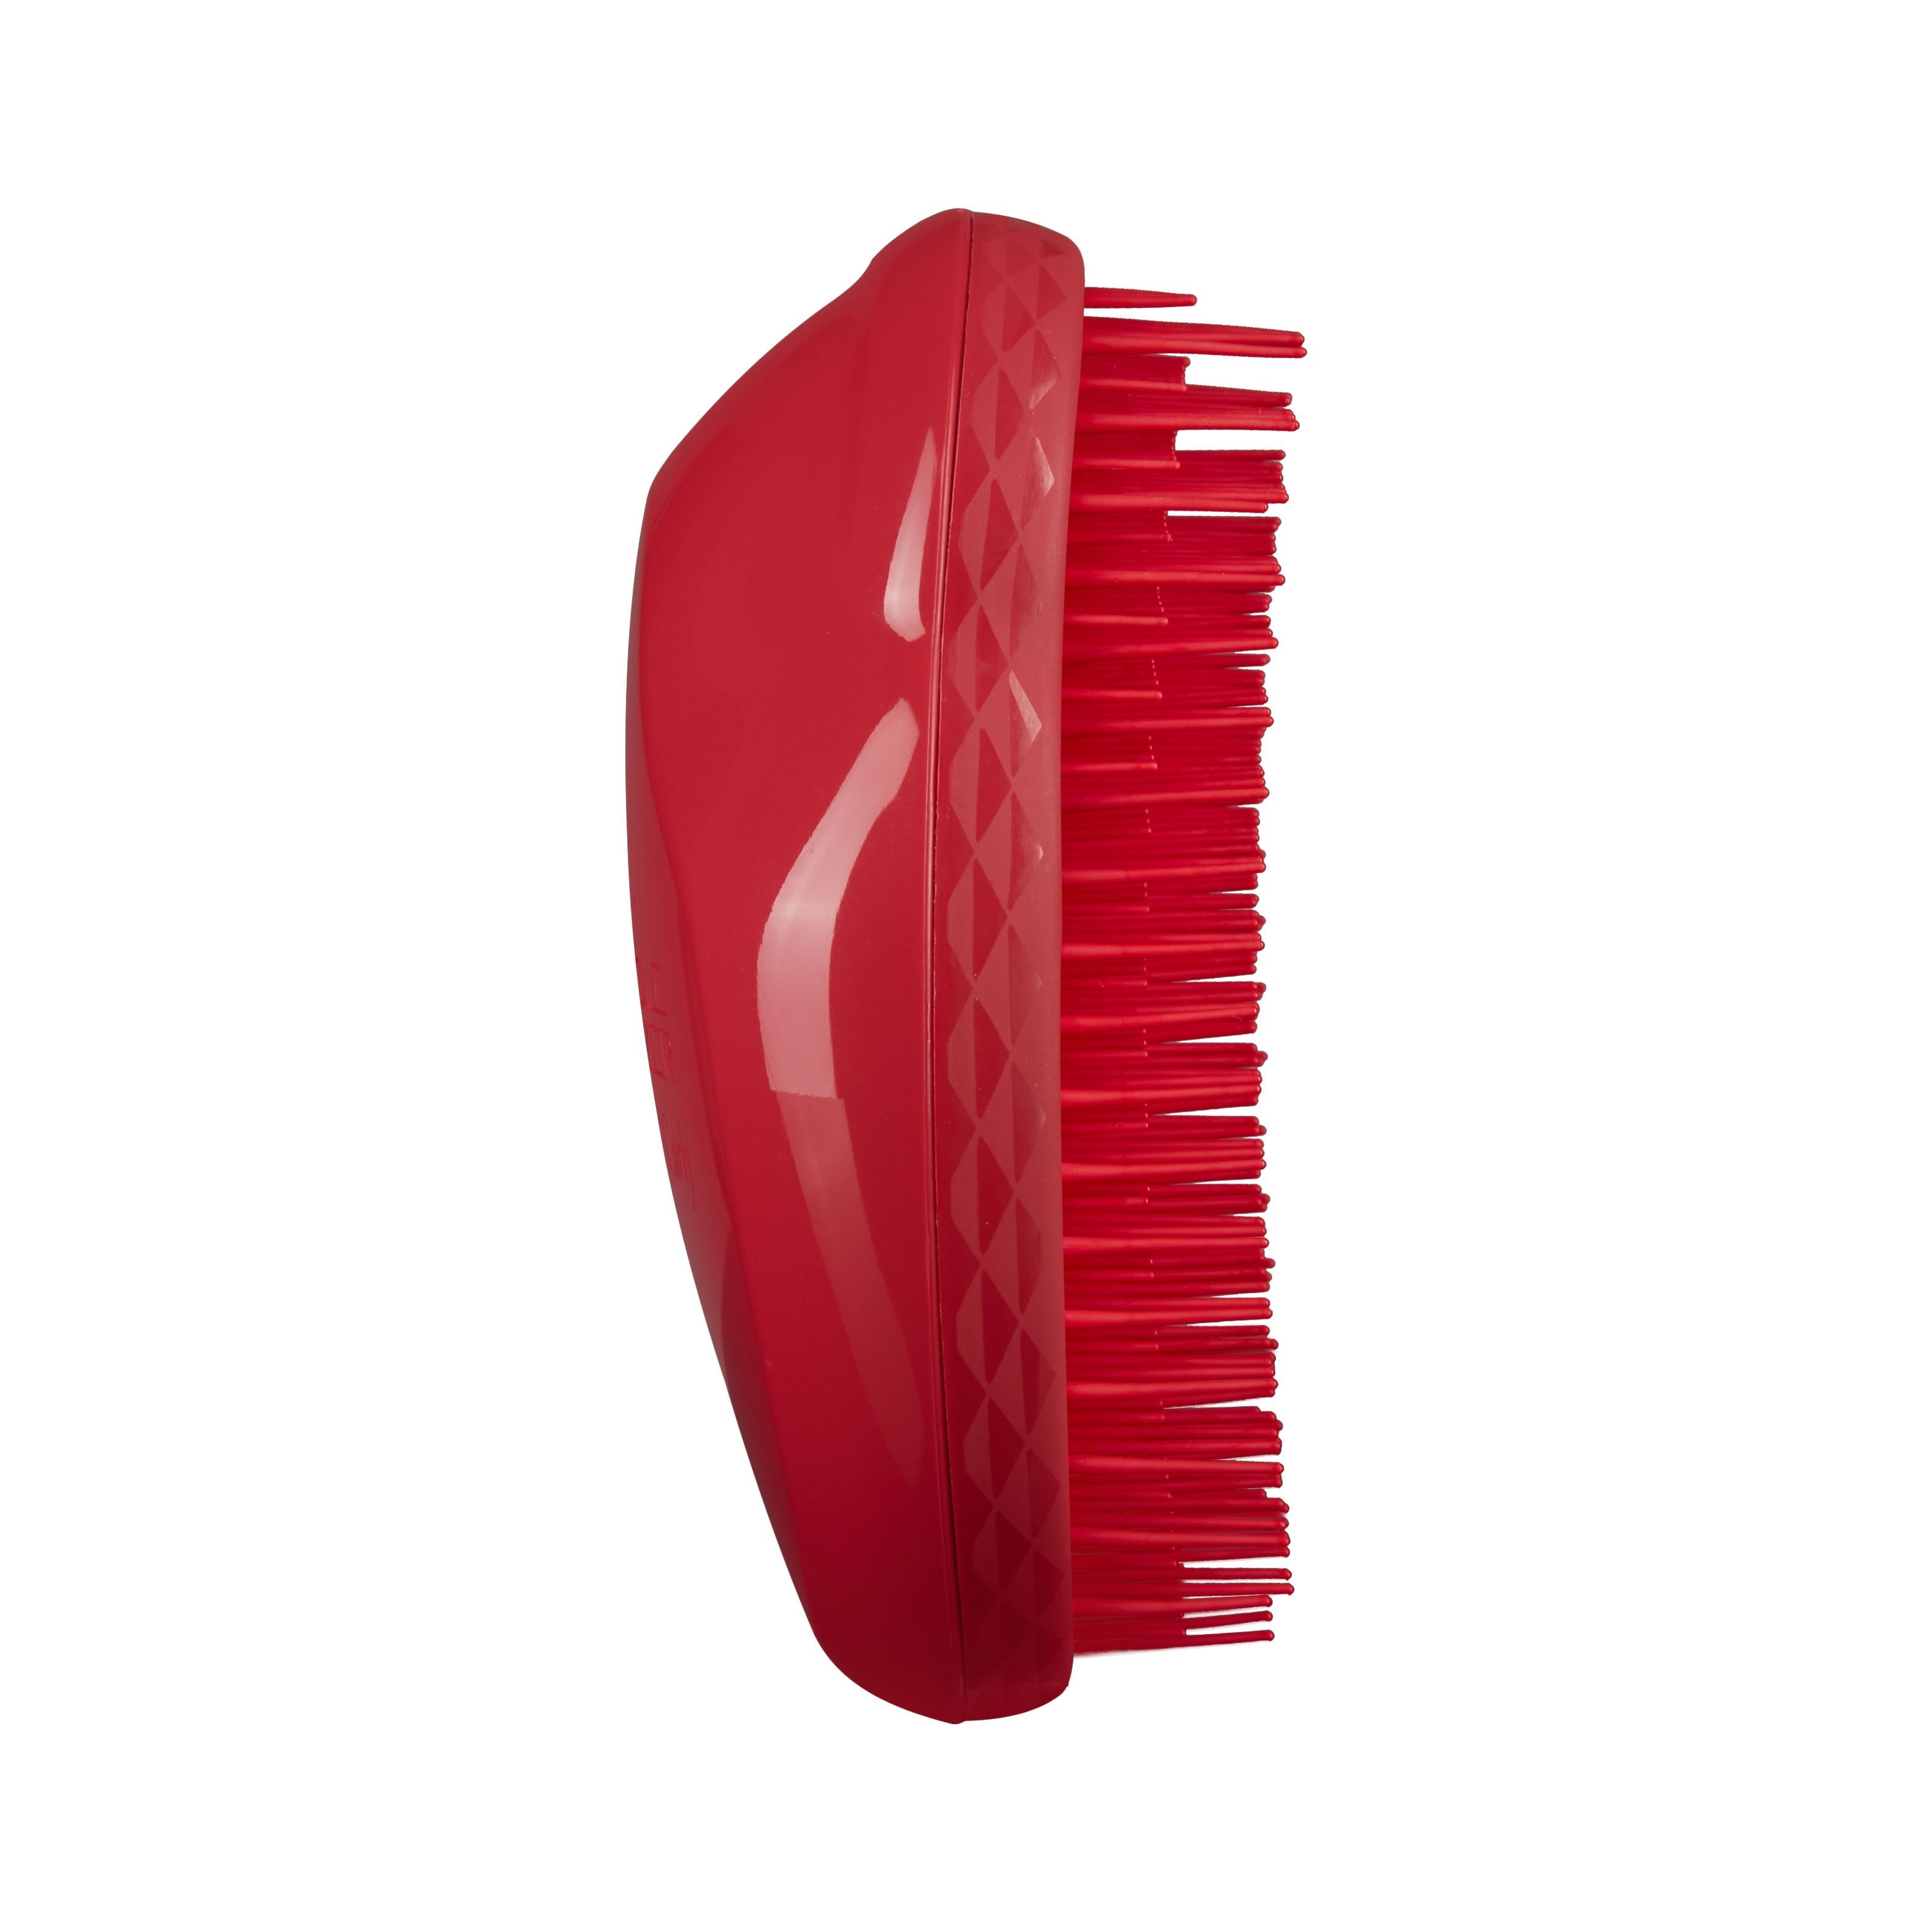 Thick & Curly Salsa Red Detangling Hair Brush